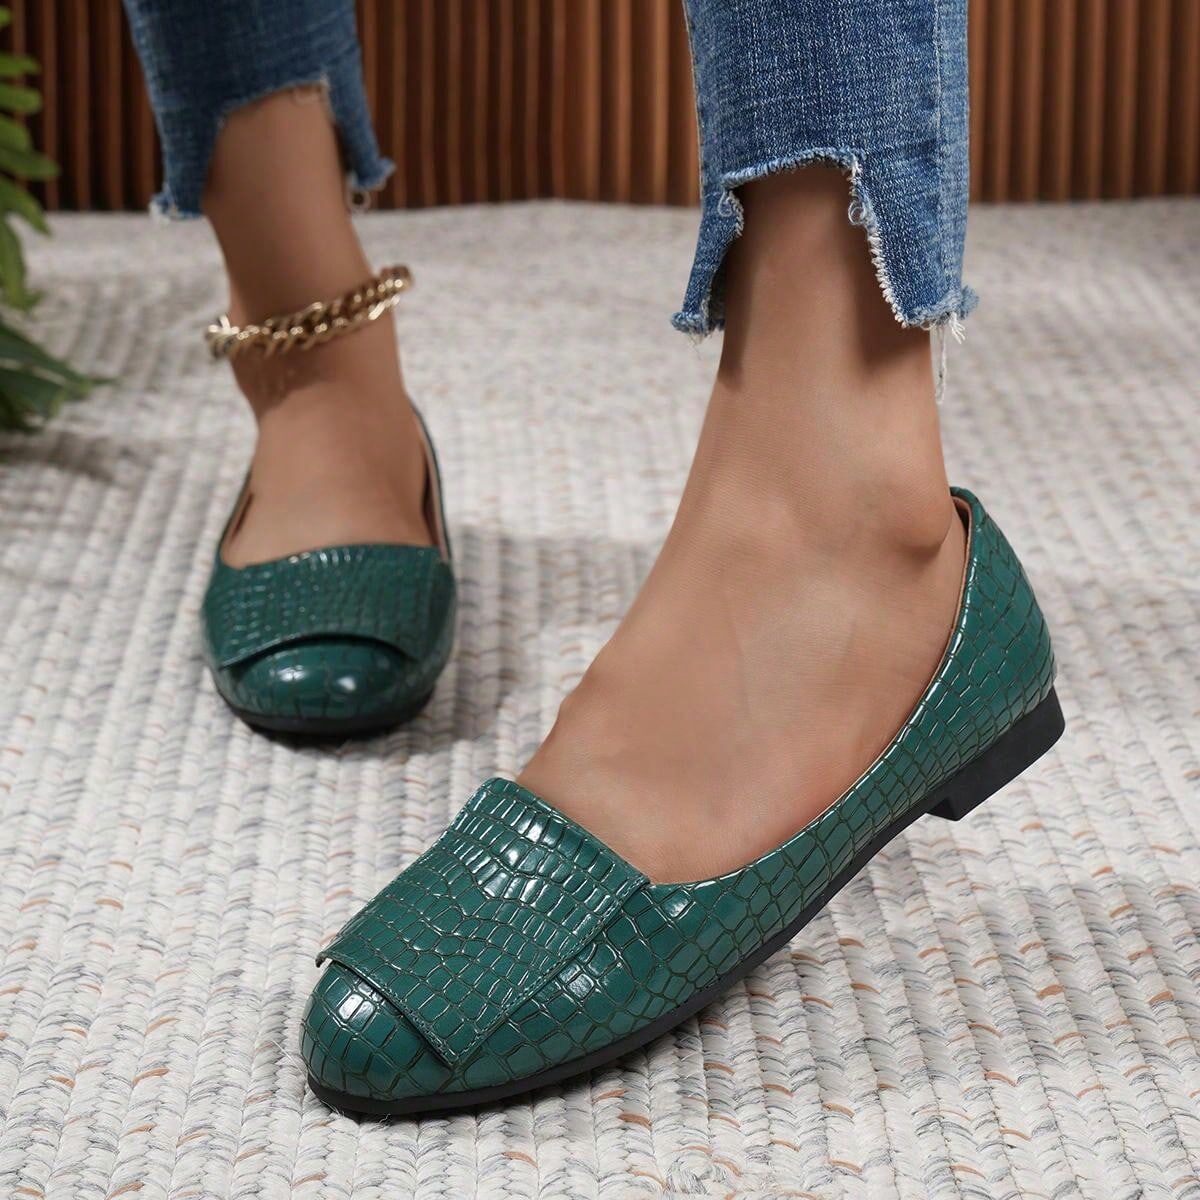 SHEIN 2023 New Comfortable Flat Shoes For Women, Slip-on Style, Suitable For All Seasons Army Green EUR36,EUR37,EUR38,EUR39,EUR40,EUR41 Women